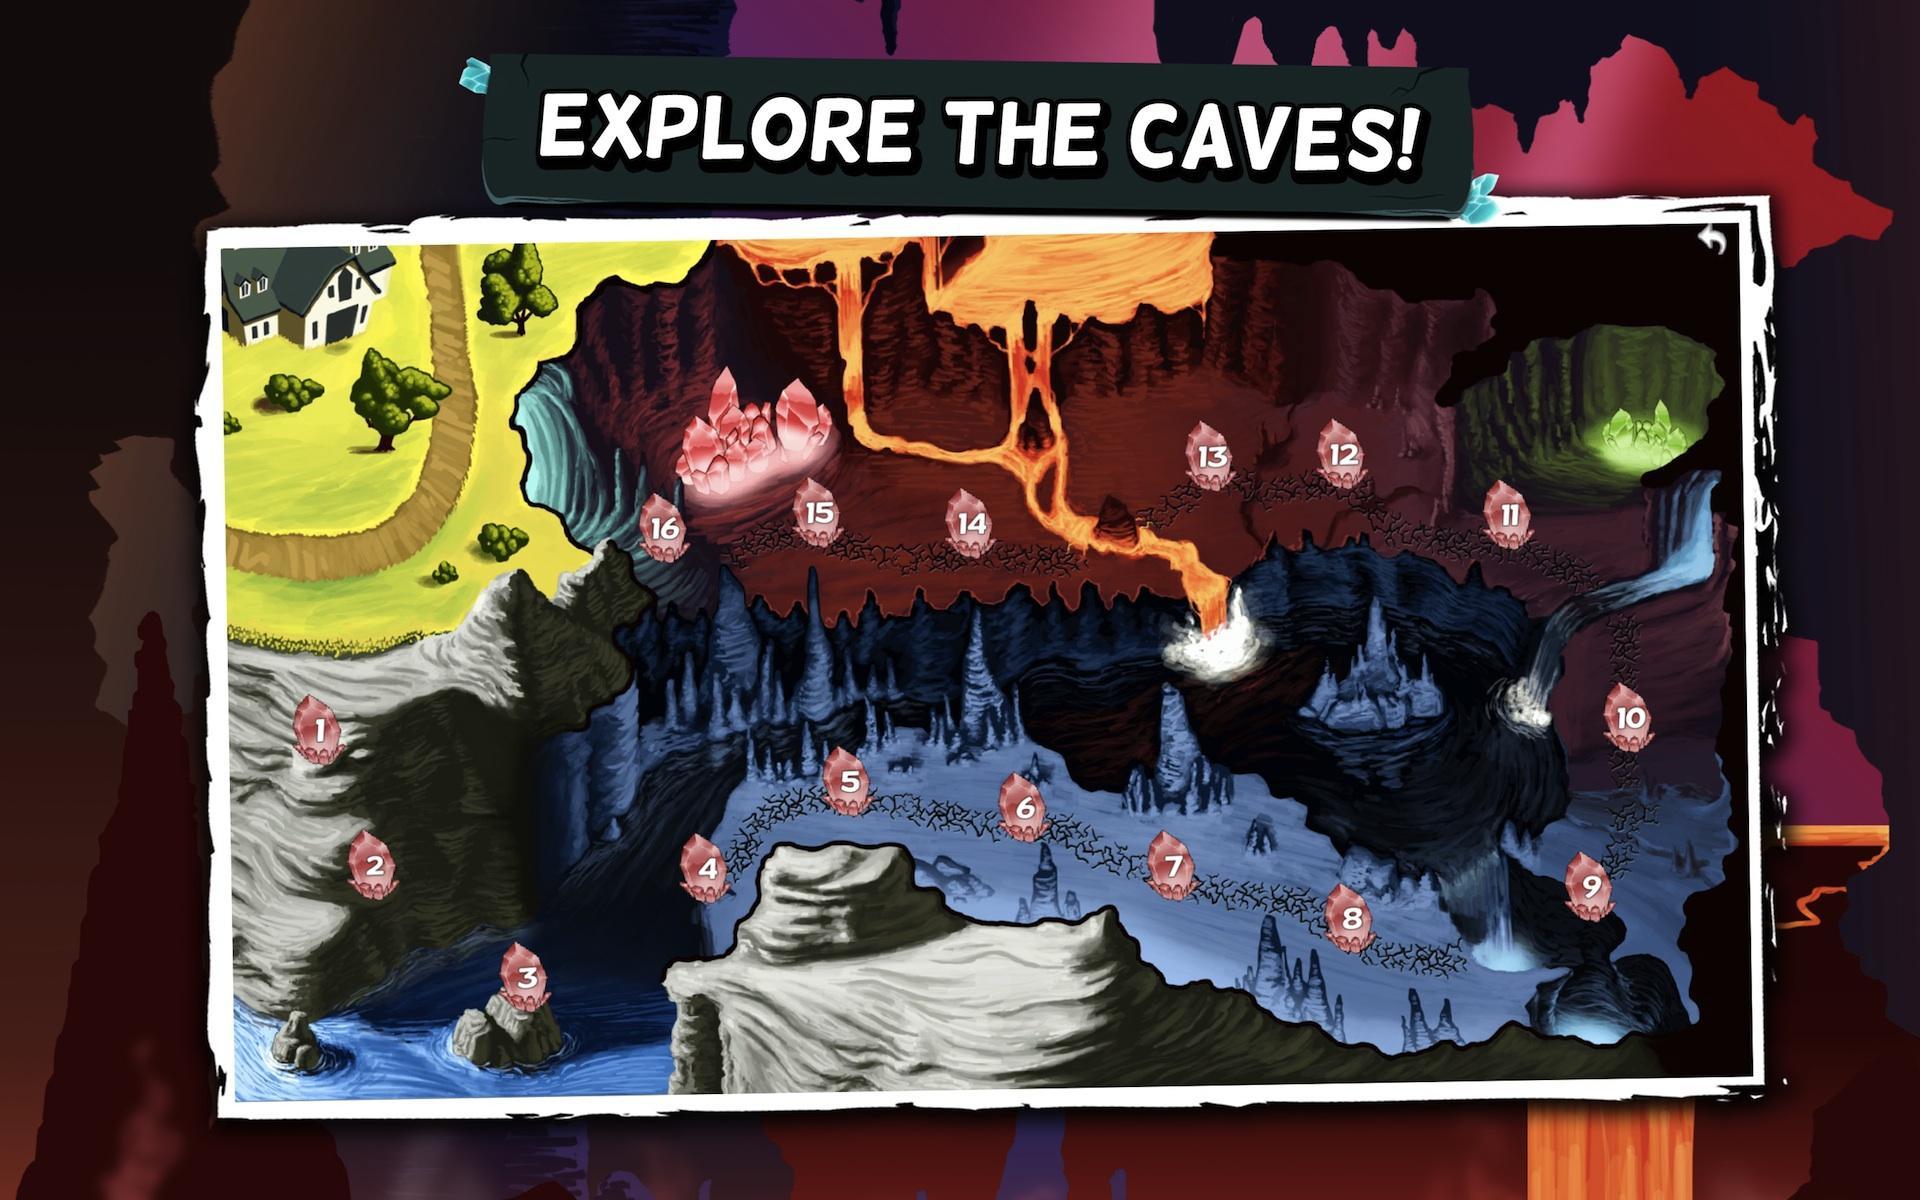 Henry and the Crystal Caves screenshot game